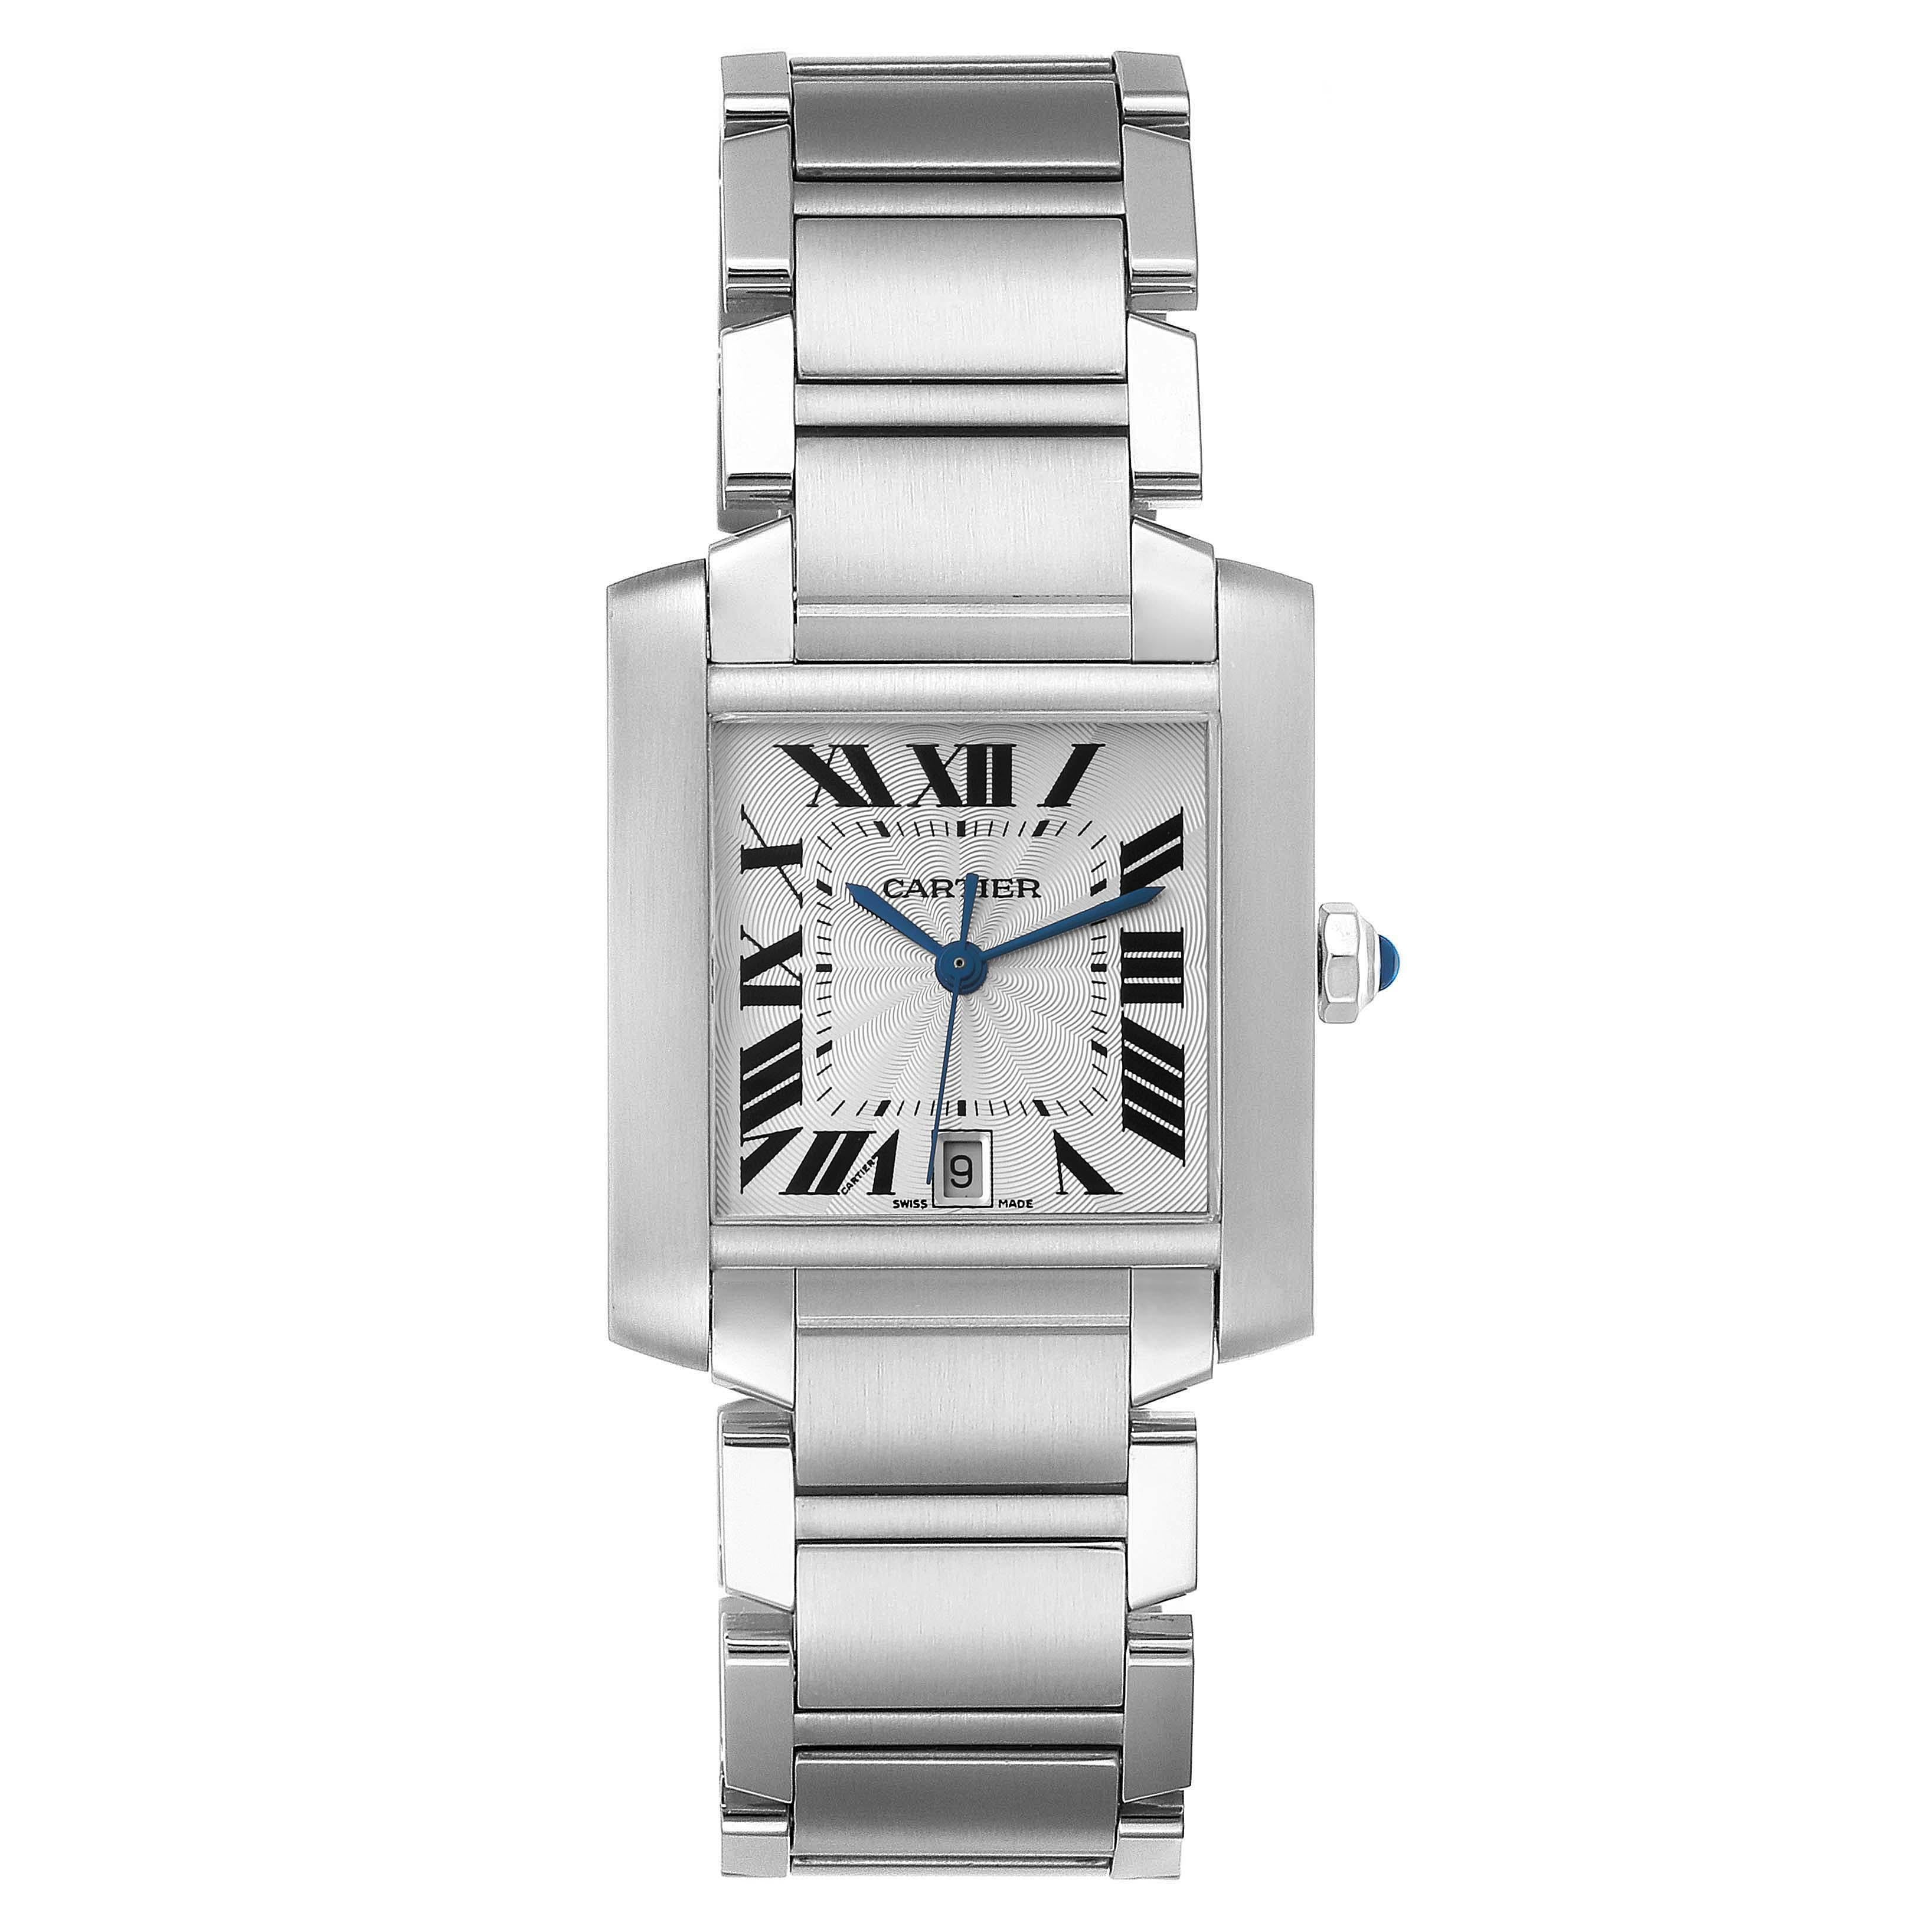 Men's Cartier Tank Francaise Large Automatic Steel Mens Watch W51002Q3 Box Papers For Sale